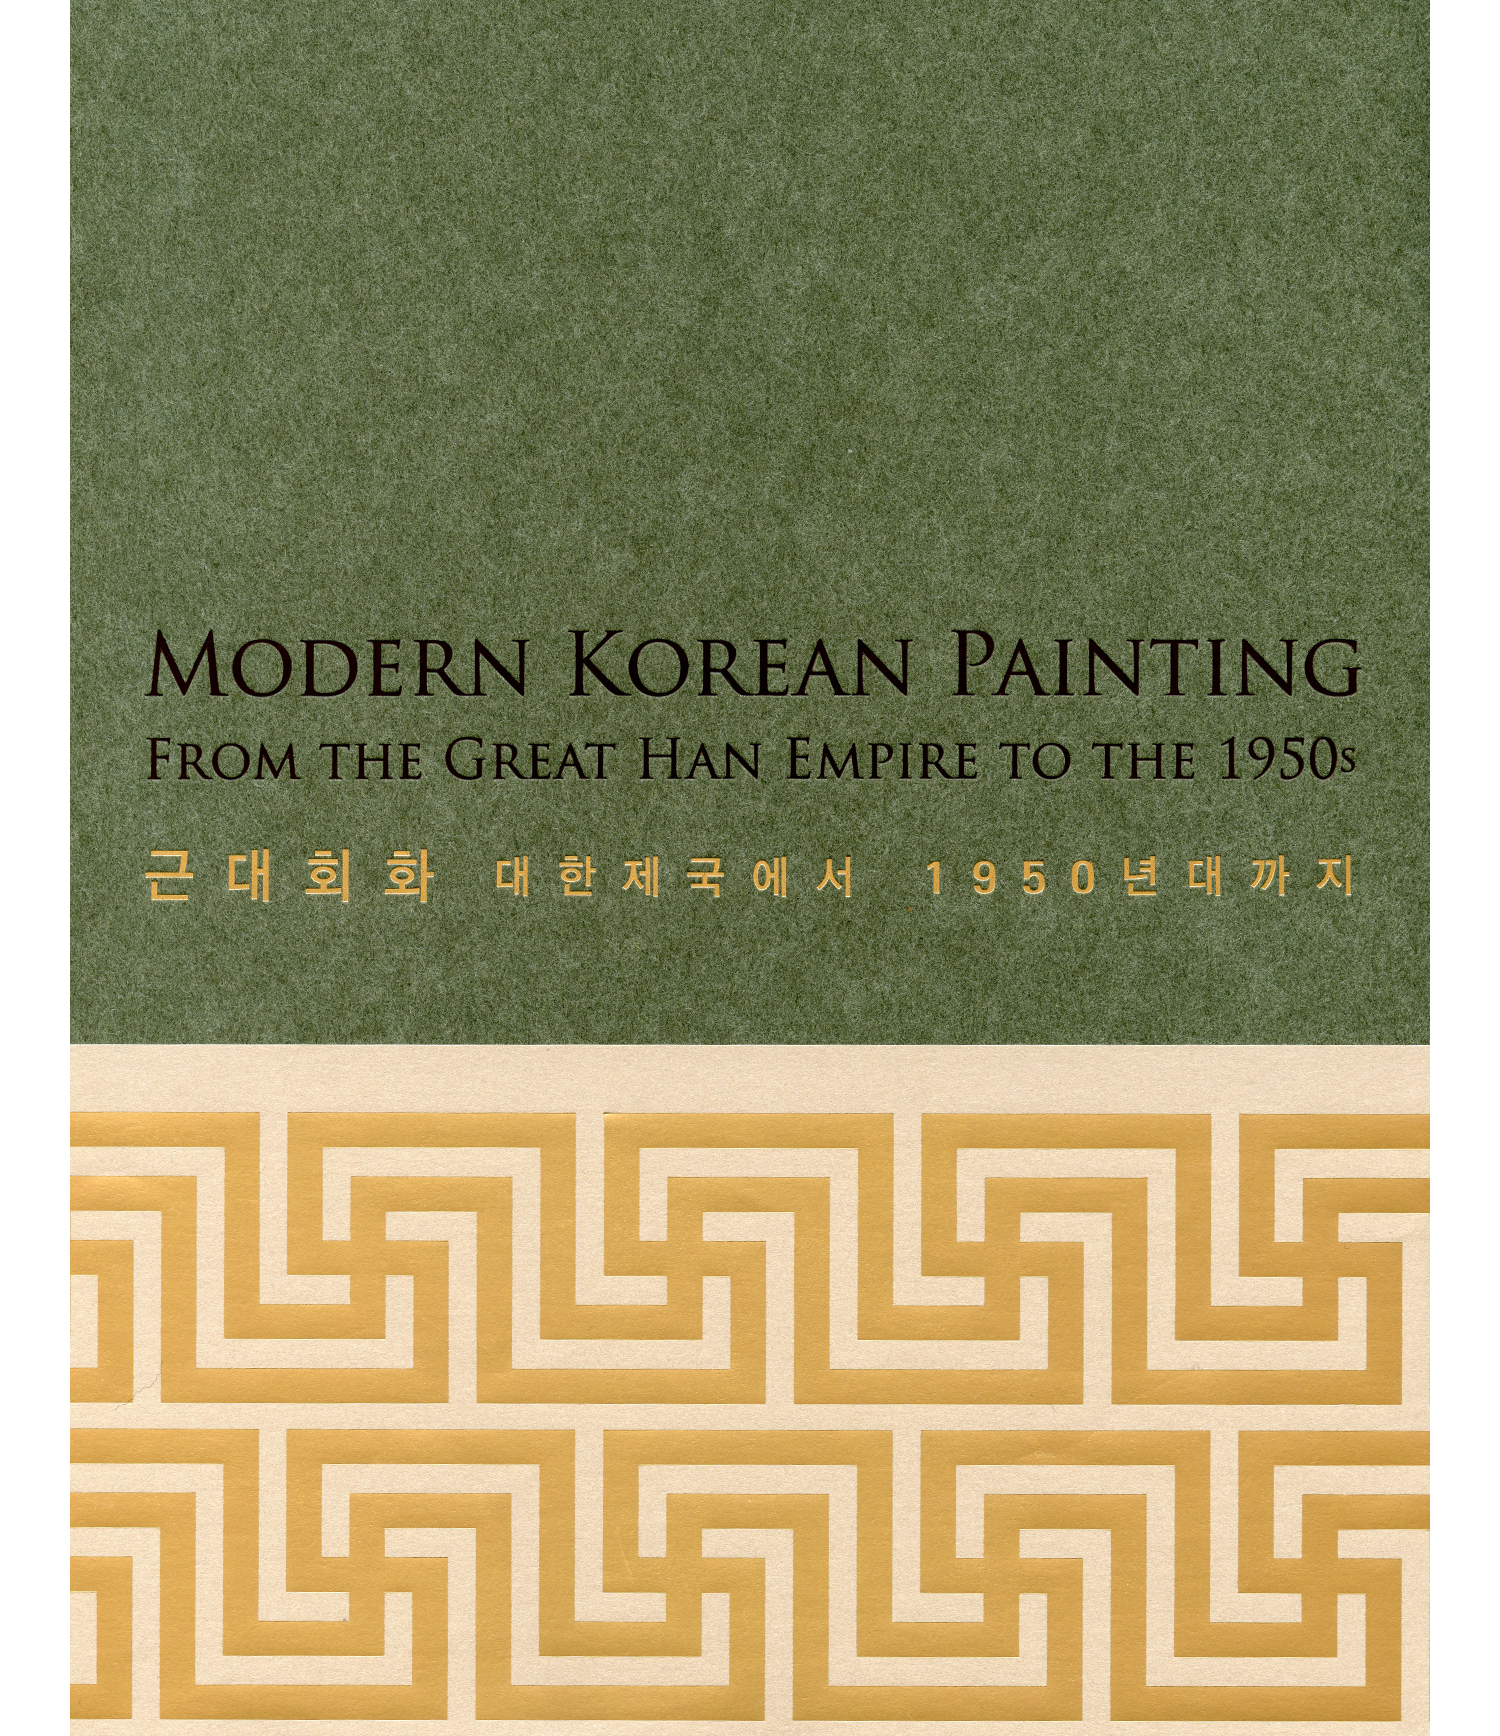 MODERN KOREAN PAINTING - FROM THE GREAT HAN EMPIRE TO THE 1950s